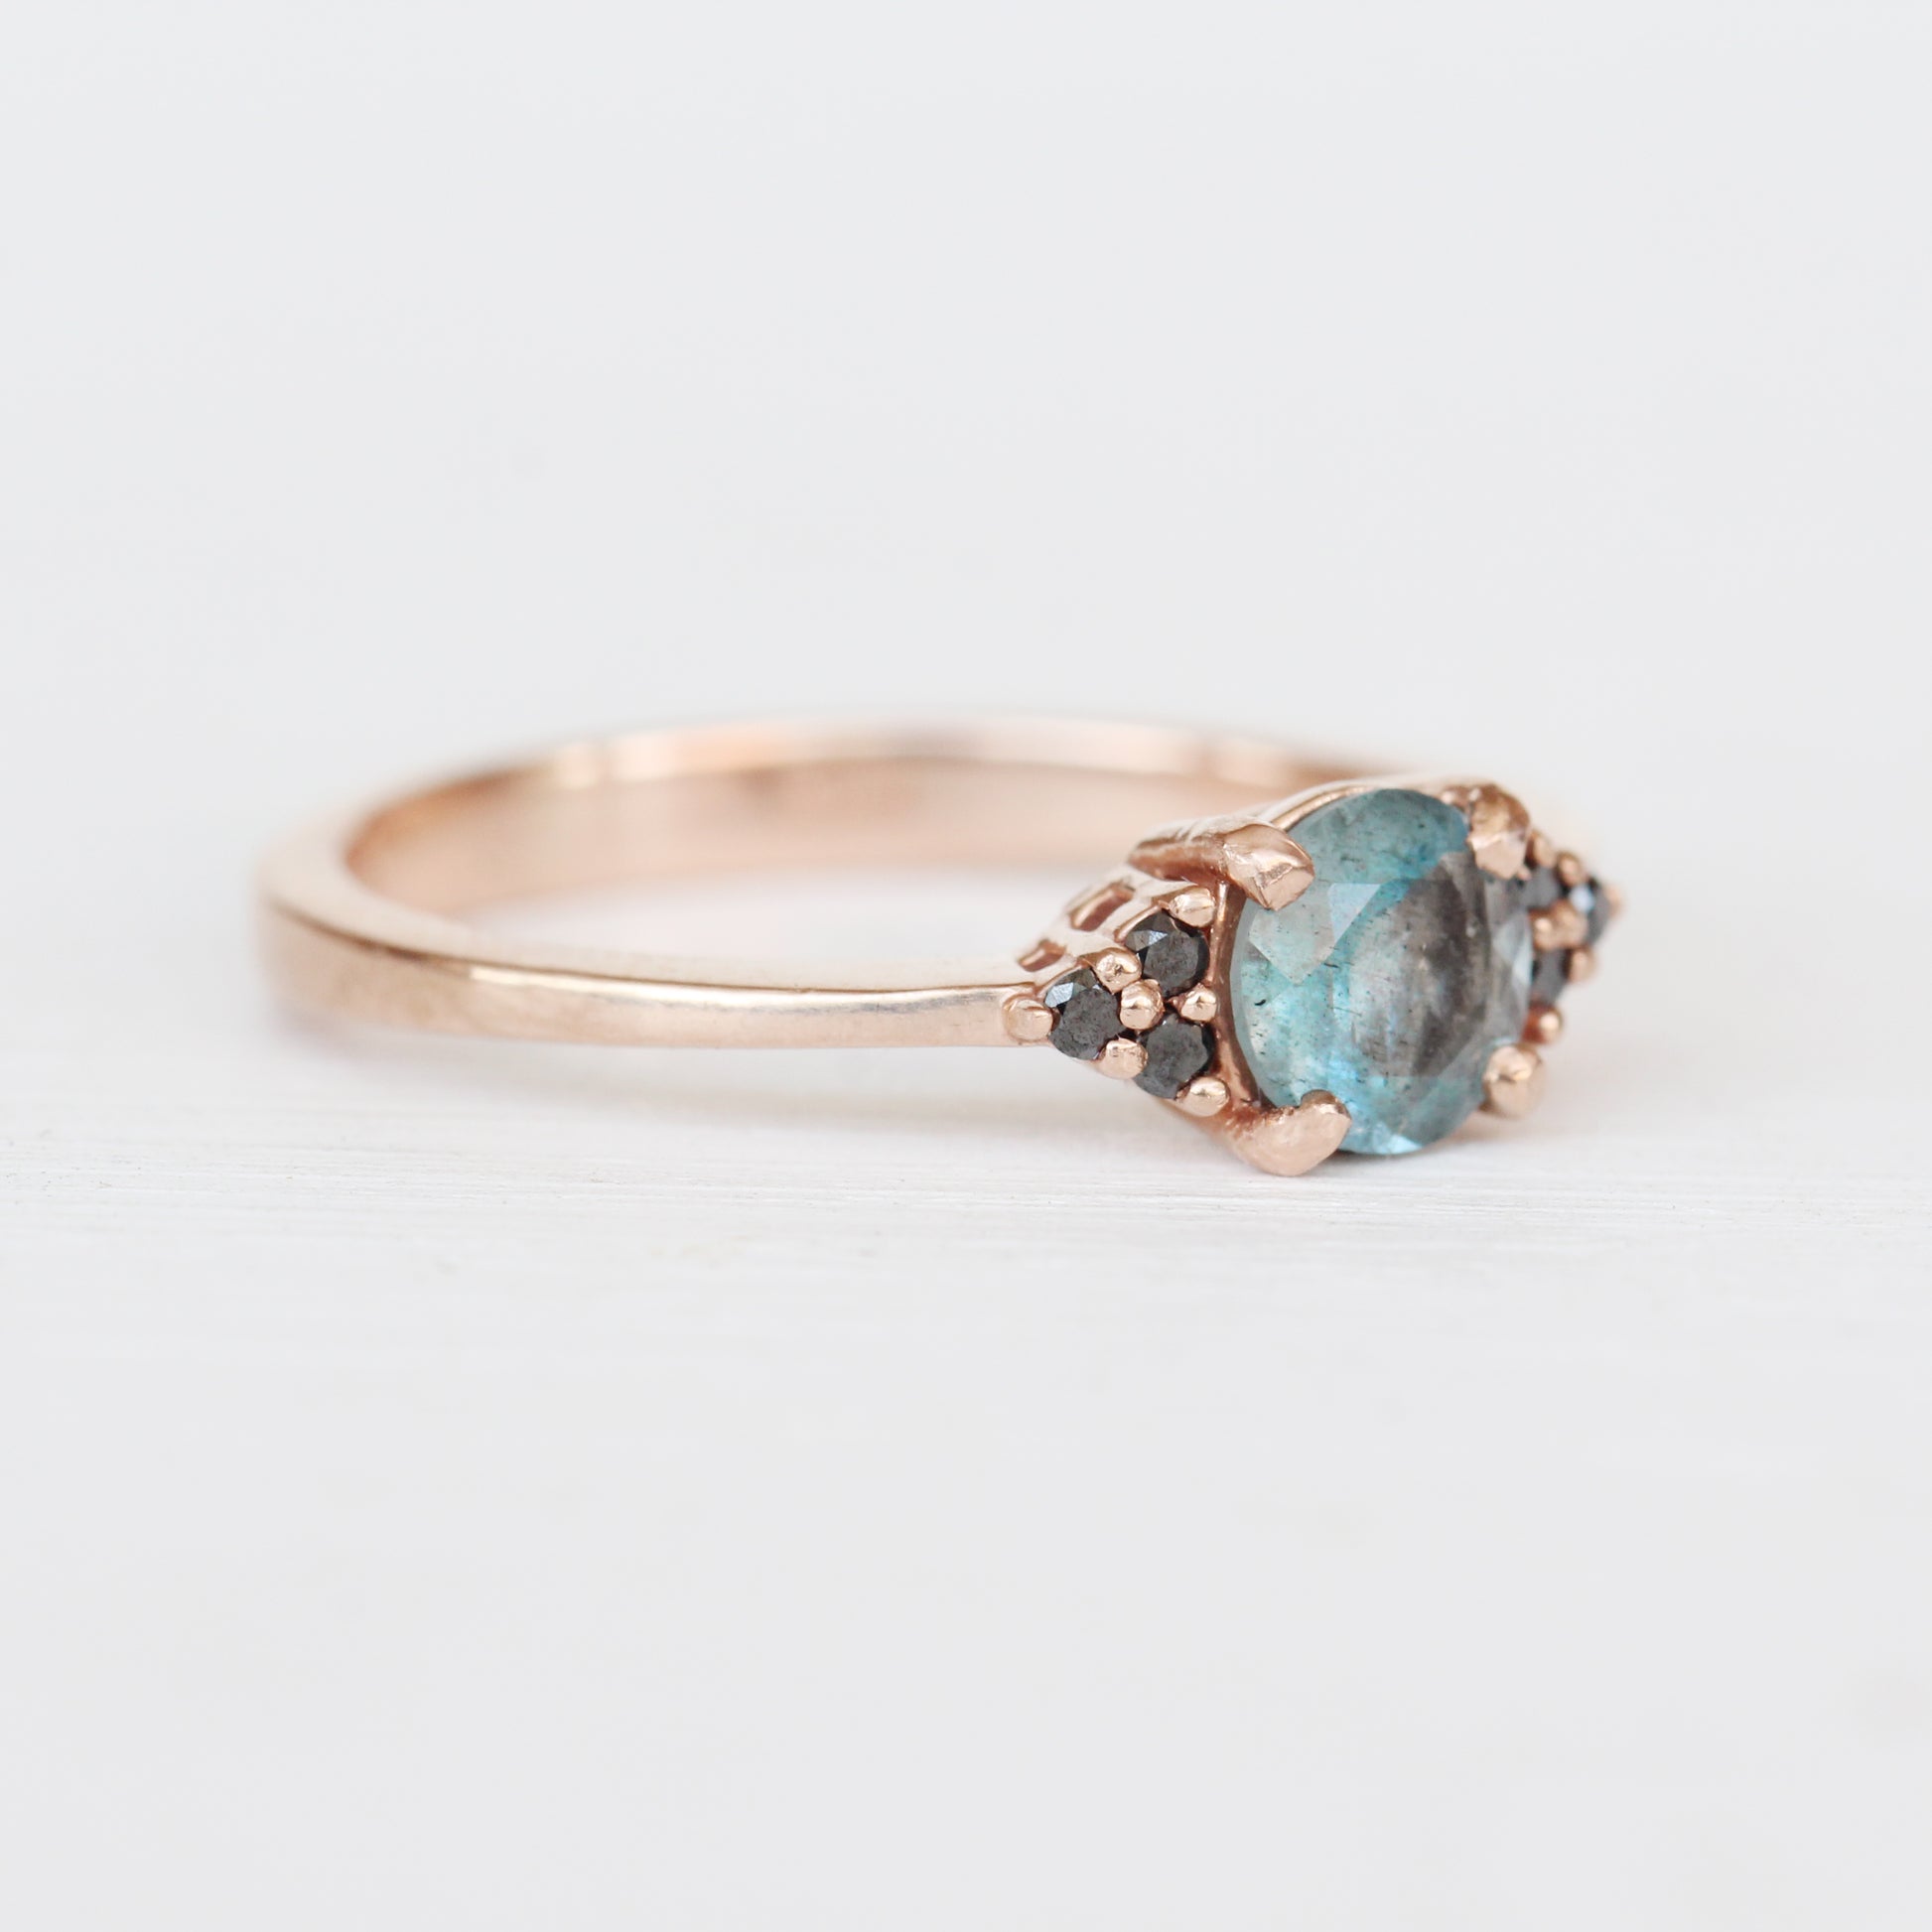 Imogene Ring with a Mossy Aquamarine and Black Diamonds in your choice of gold - Midwinter Co. Alternative Bridal Rings and Modern Fine Jewelry